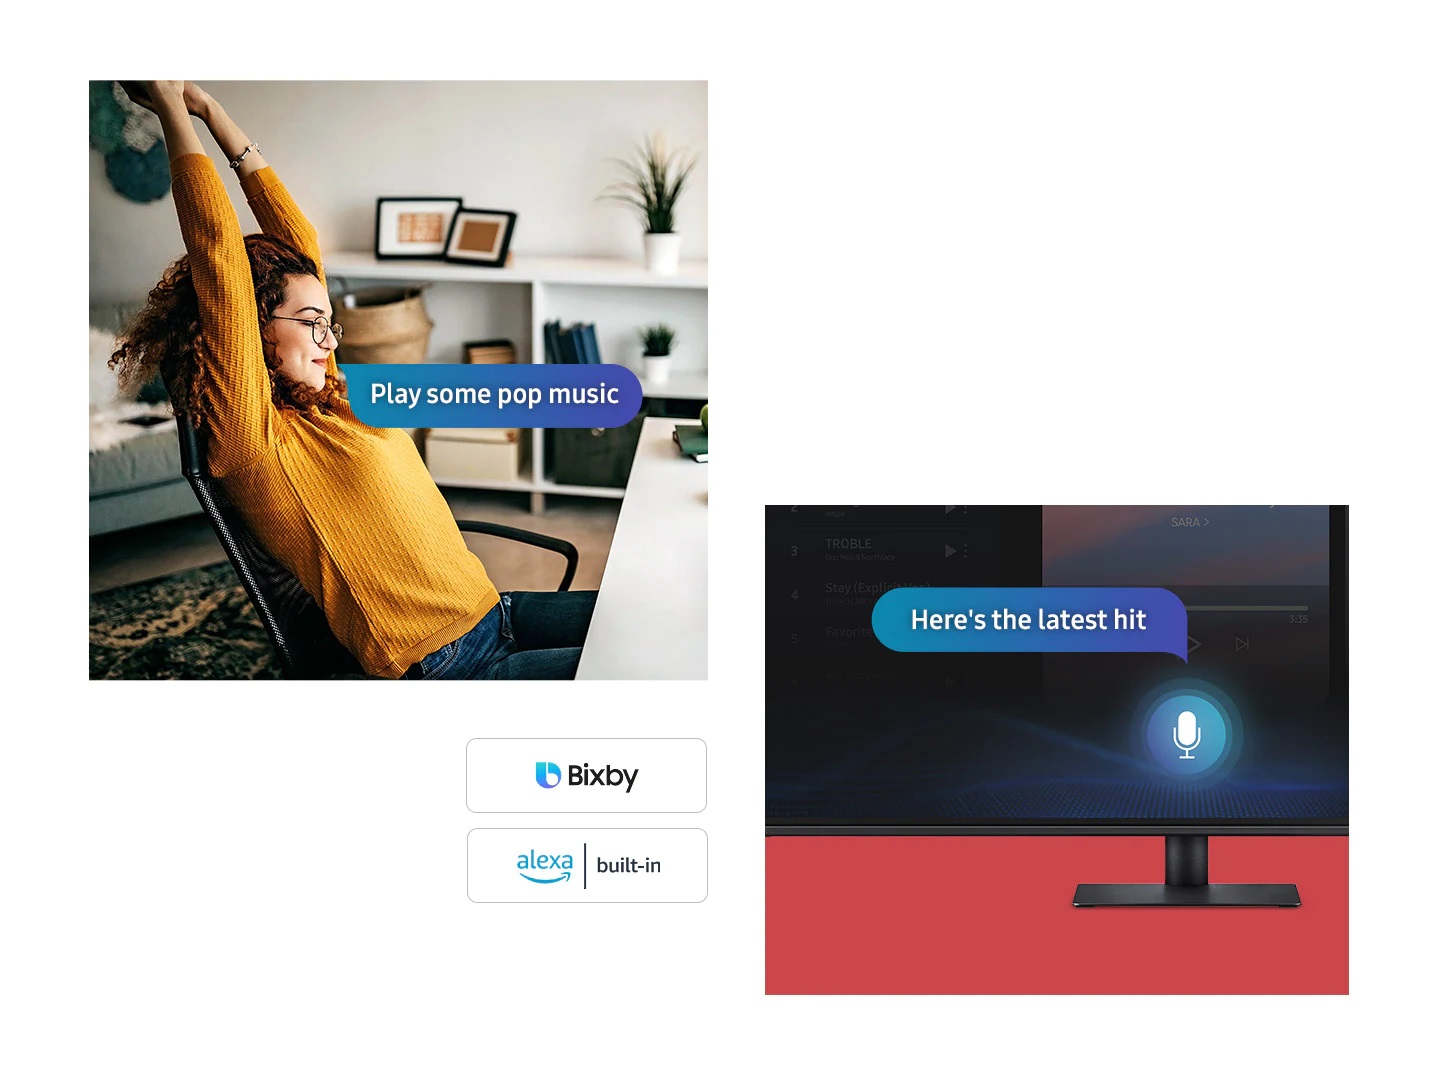 Just say what you want Multiple Voice Assistants With the Far Field Voice feature, activate your voice assistant just by speaking. Directly command the monitor – even at a distance – and tell it what you need. It’s as simple as that. The Smart Monitor supports both Bixby and Amazon Alexa.